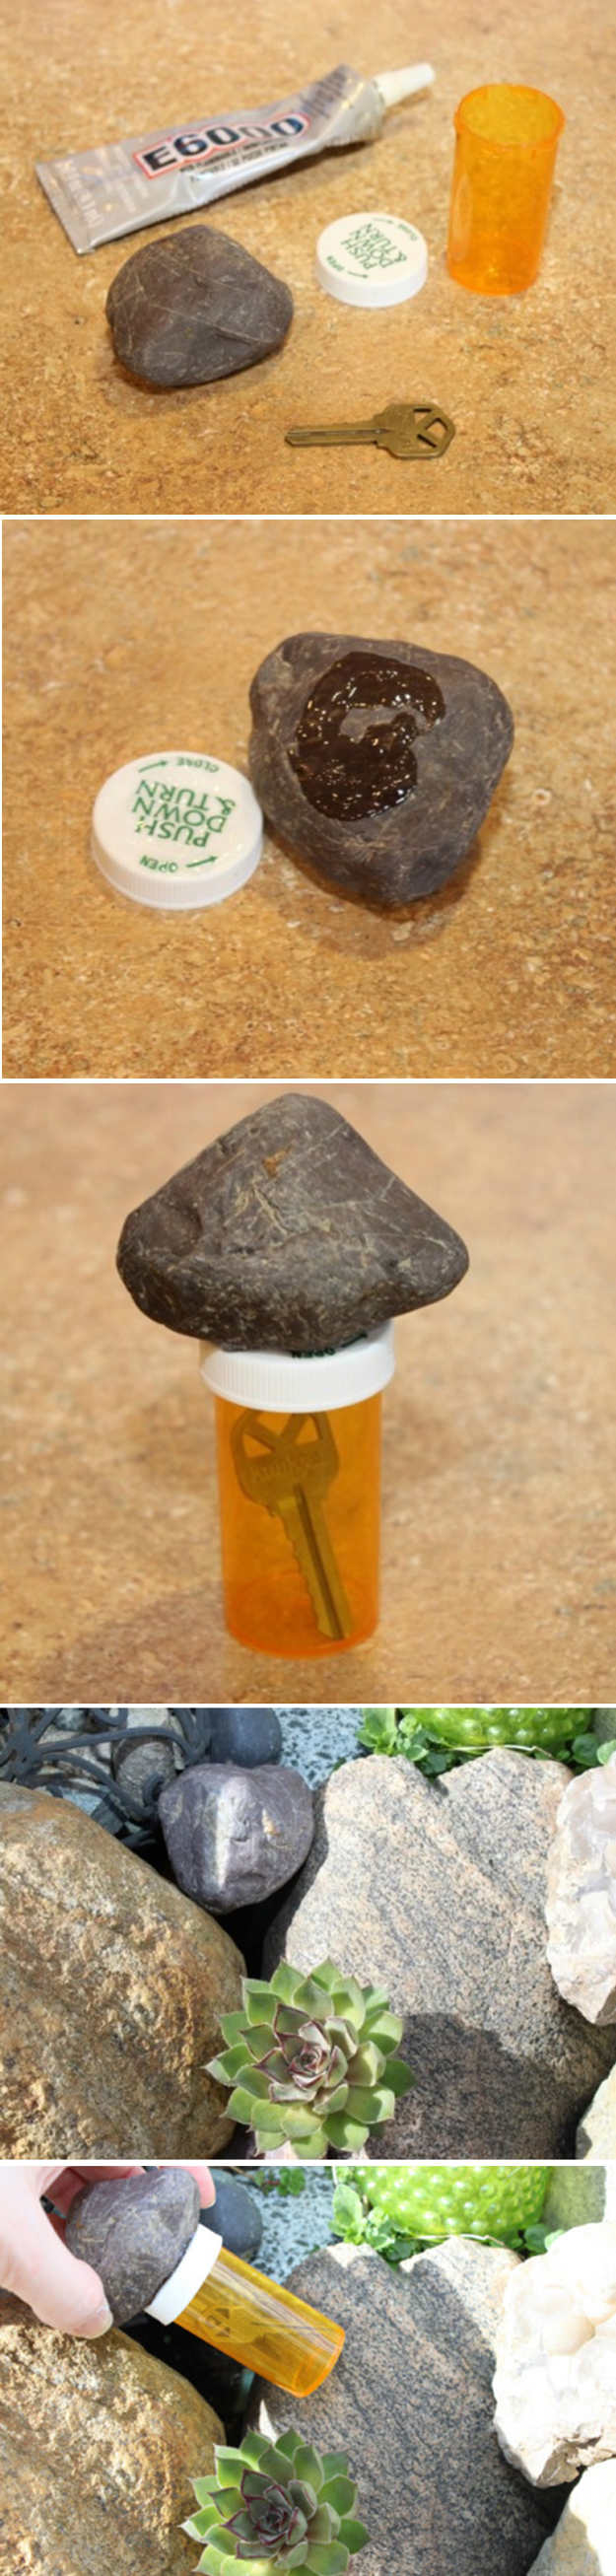 15-Awesome-DIY-Uses-for-Pill-Bottles-Concealed-Key